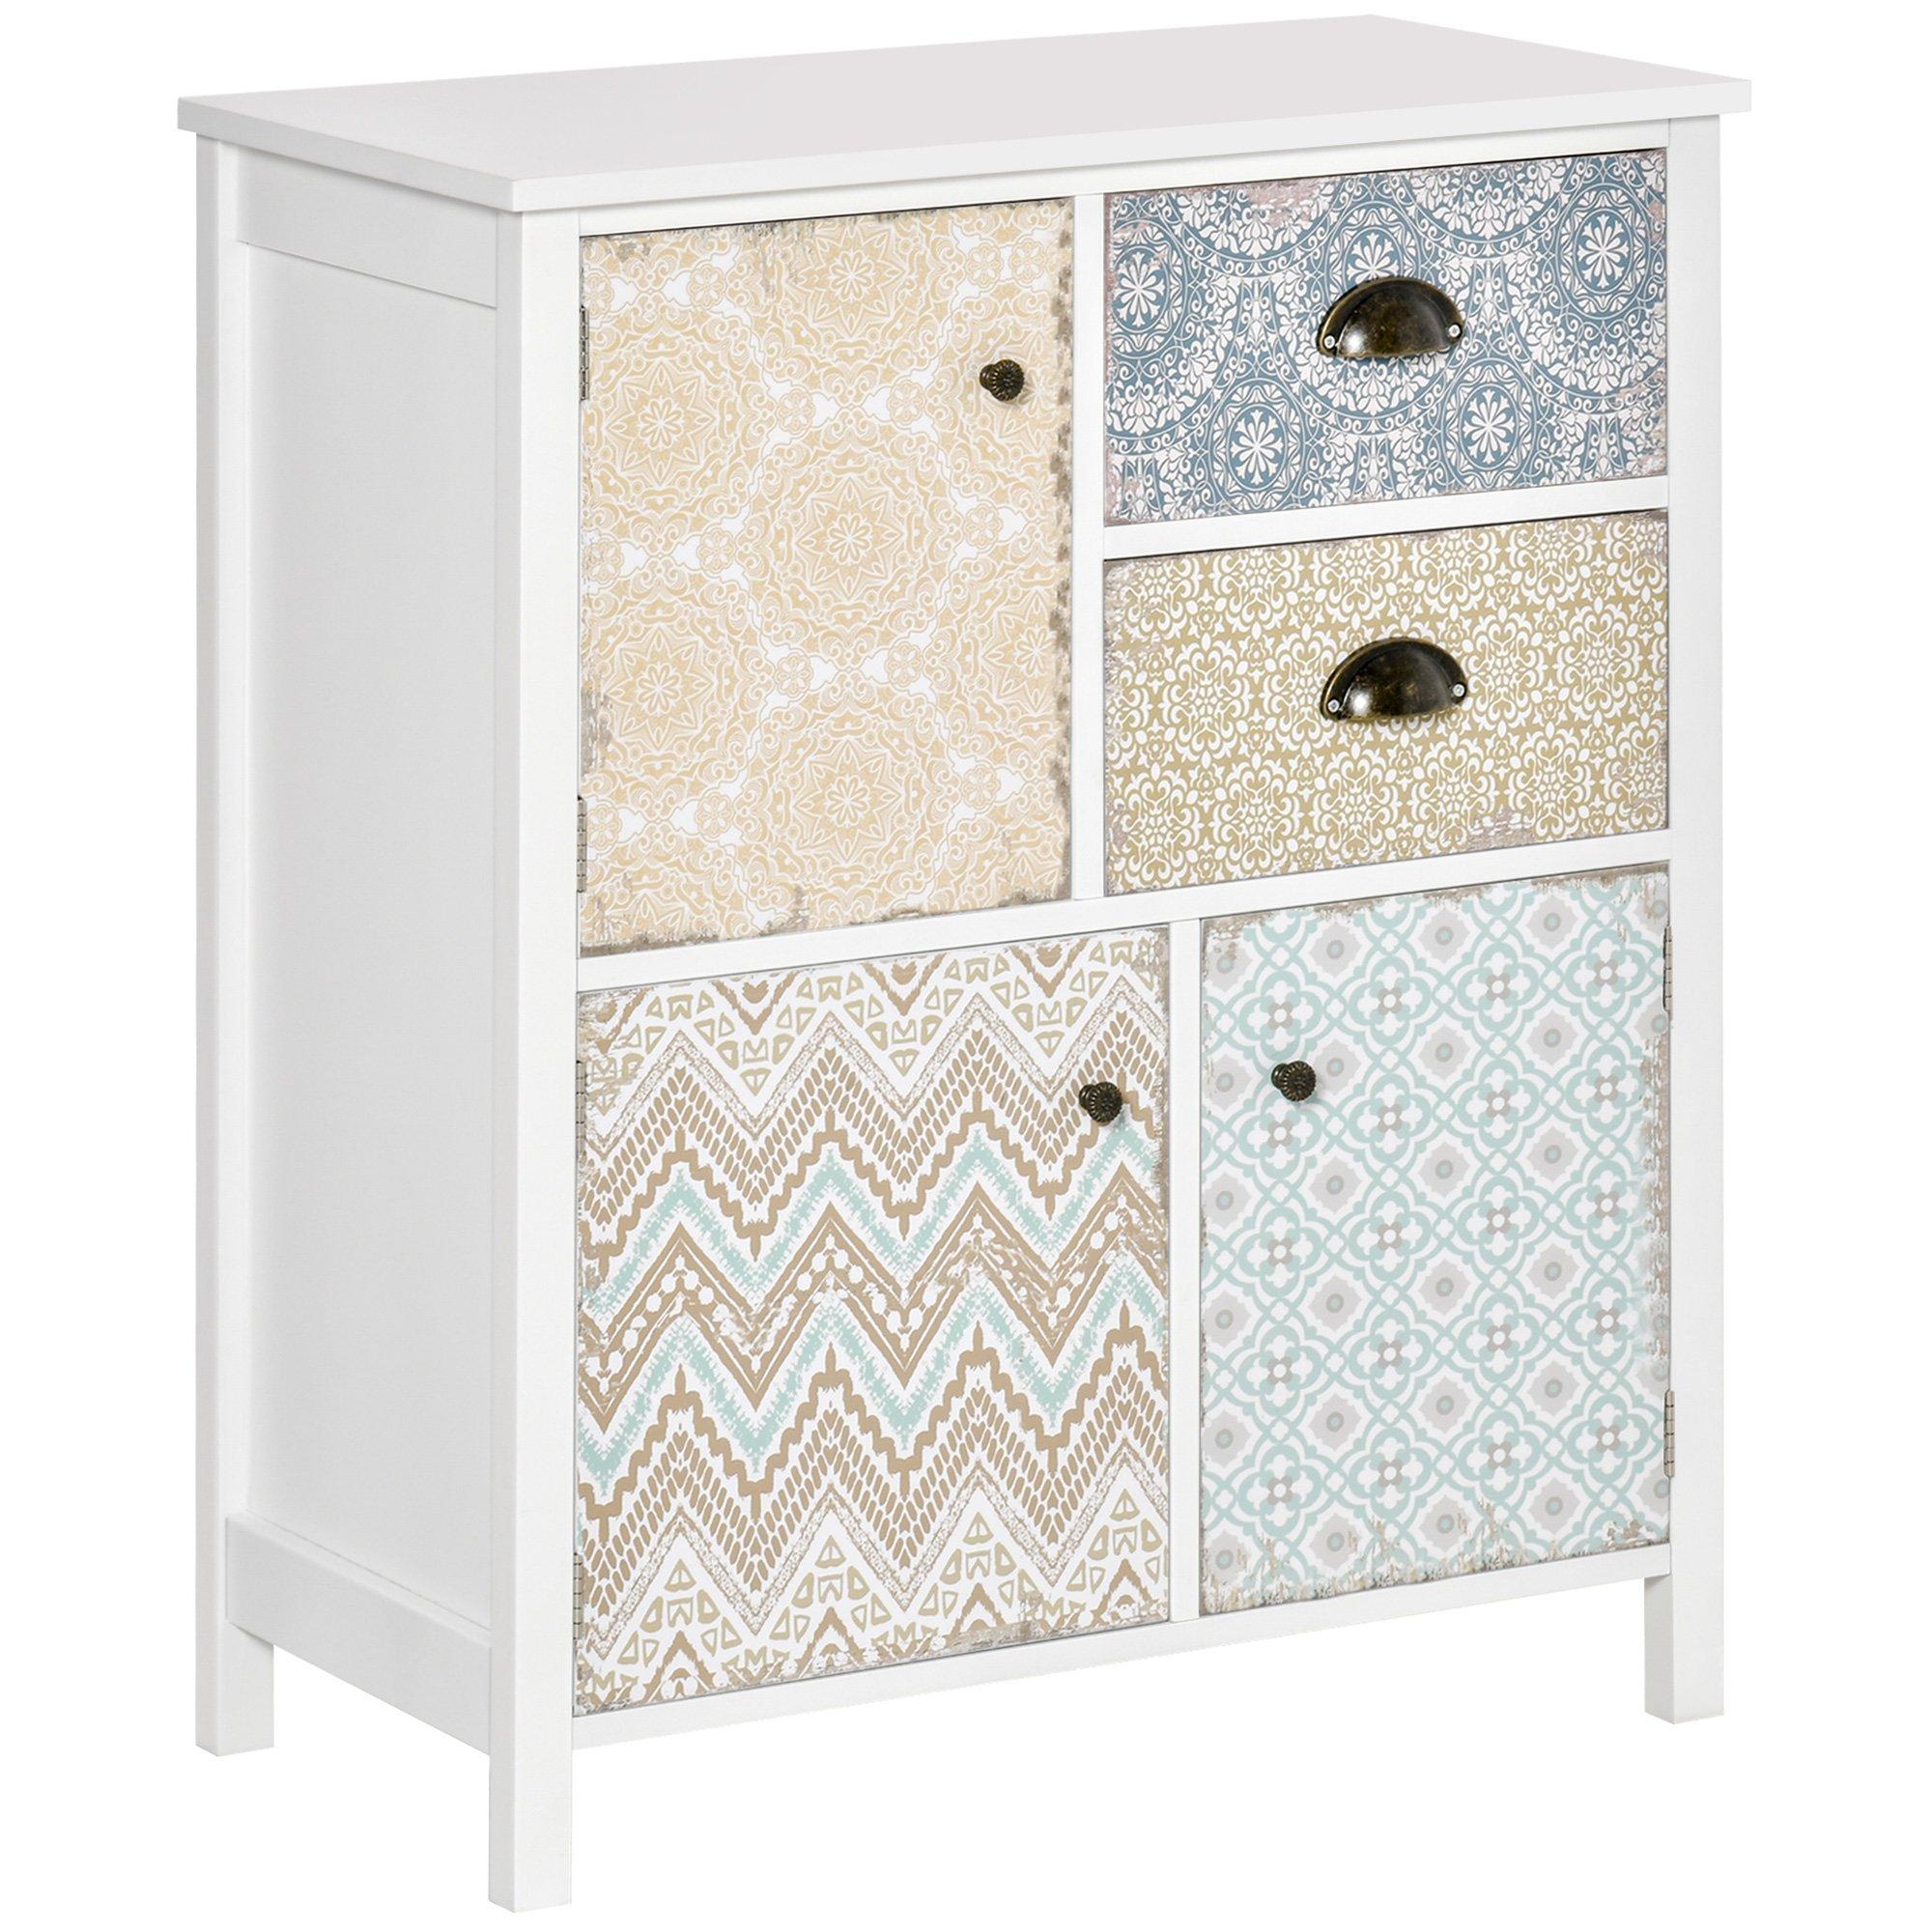 Sideboard Storage Chest Shabby Chic Cabinet Multi purpose Entryway